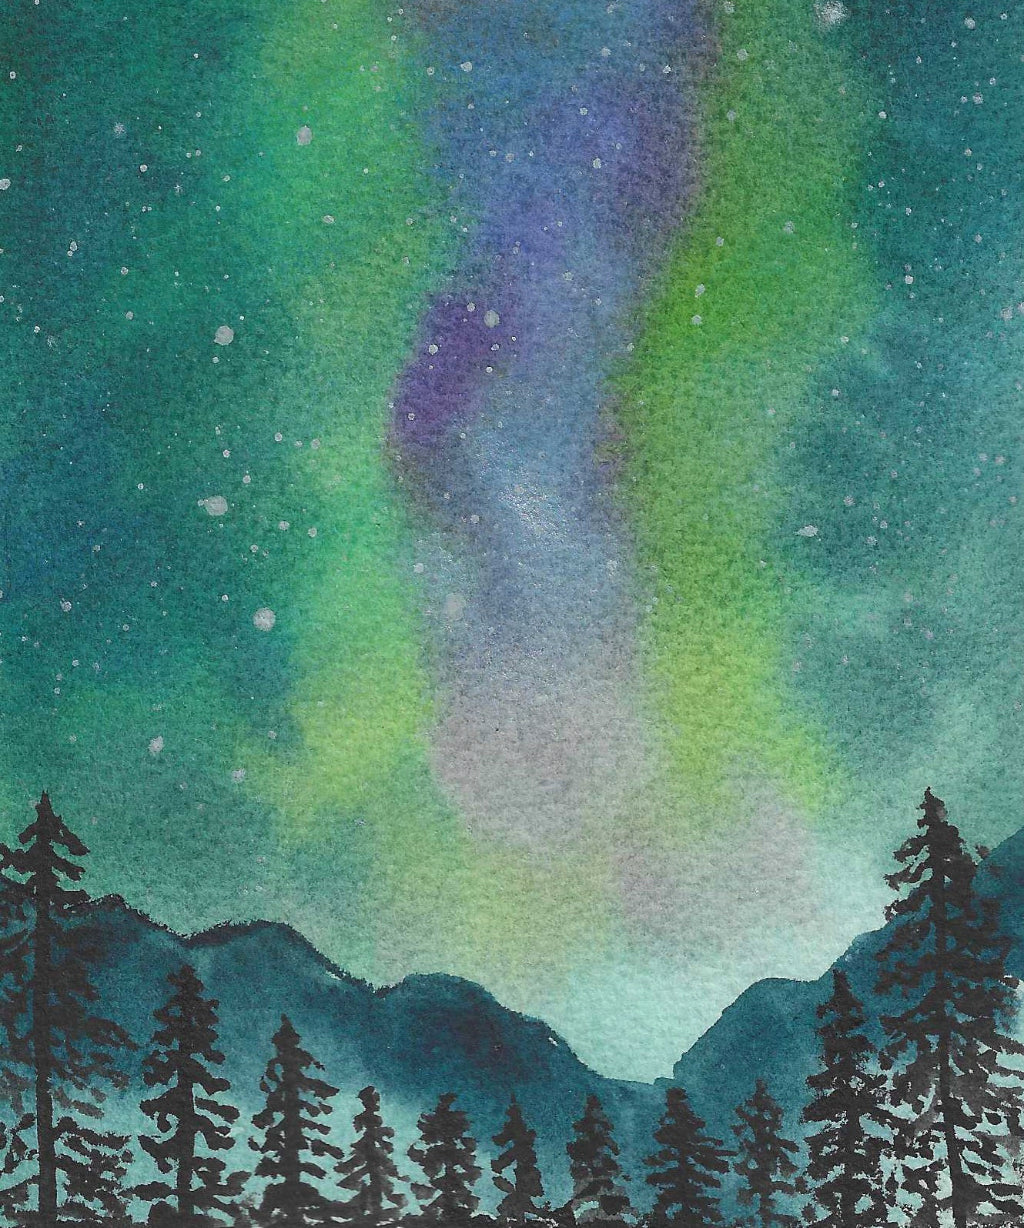 Northern lights painting and two trees